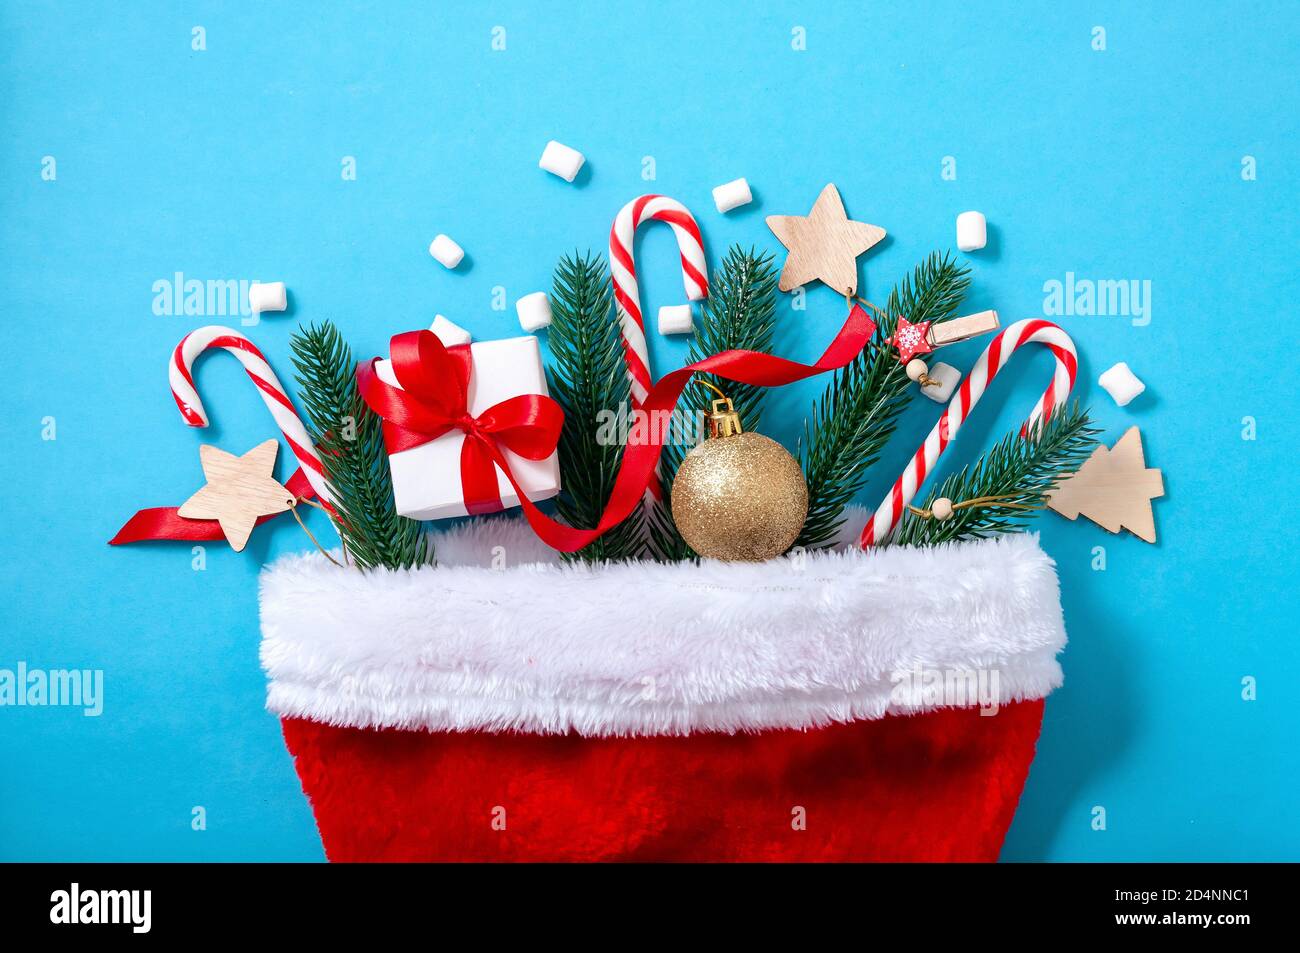 Creative Christmas Concept with Santa Hat, Fir Tree, Gift Box, Ball and Candys on Blue Background. Top View. Flat Lay. Stock Photo